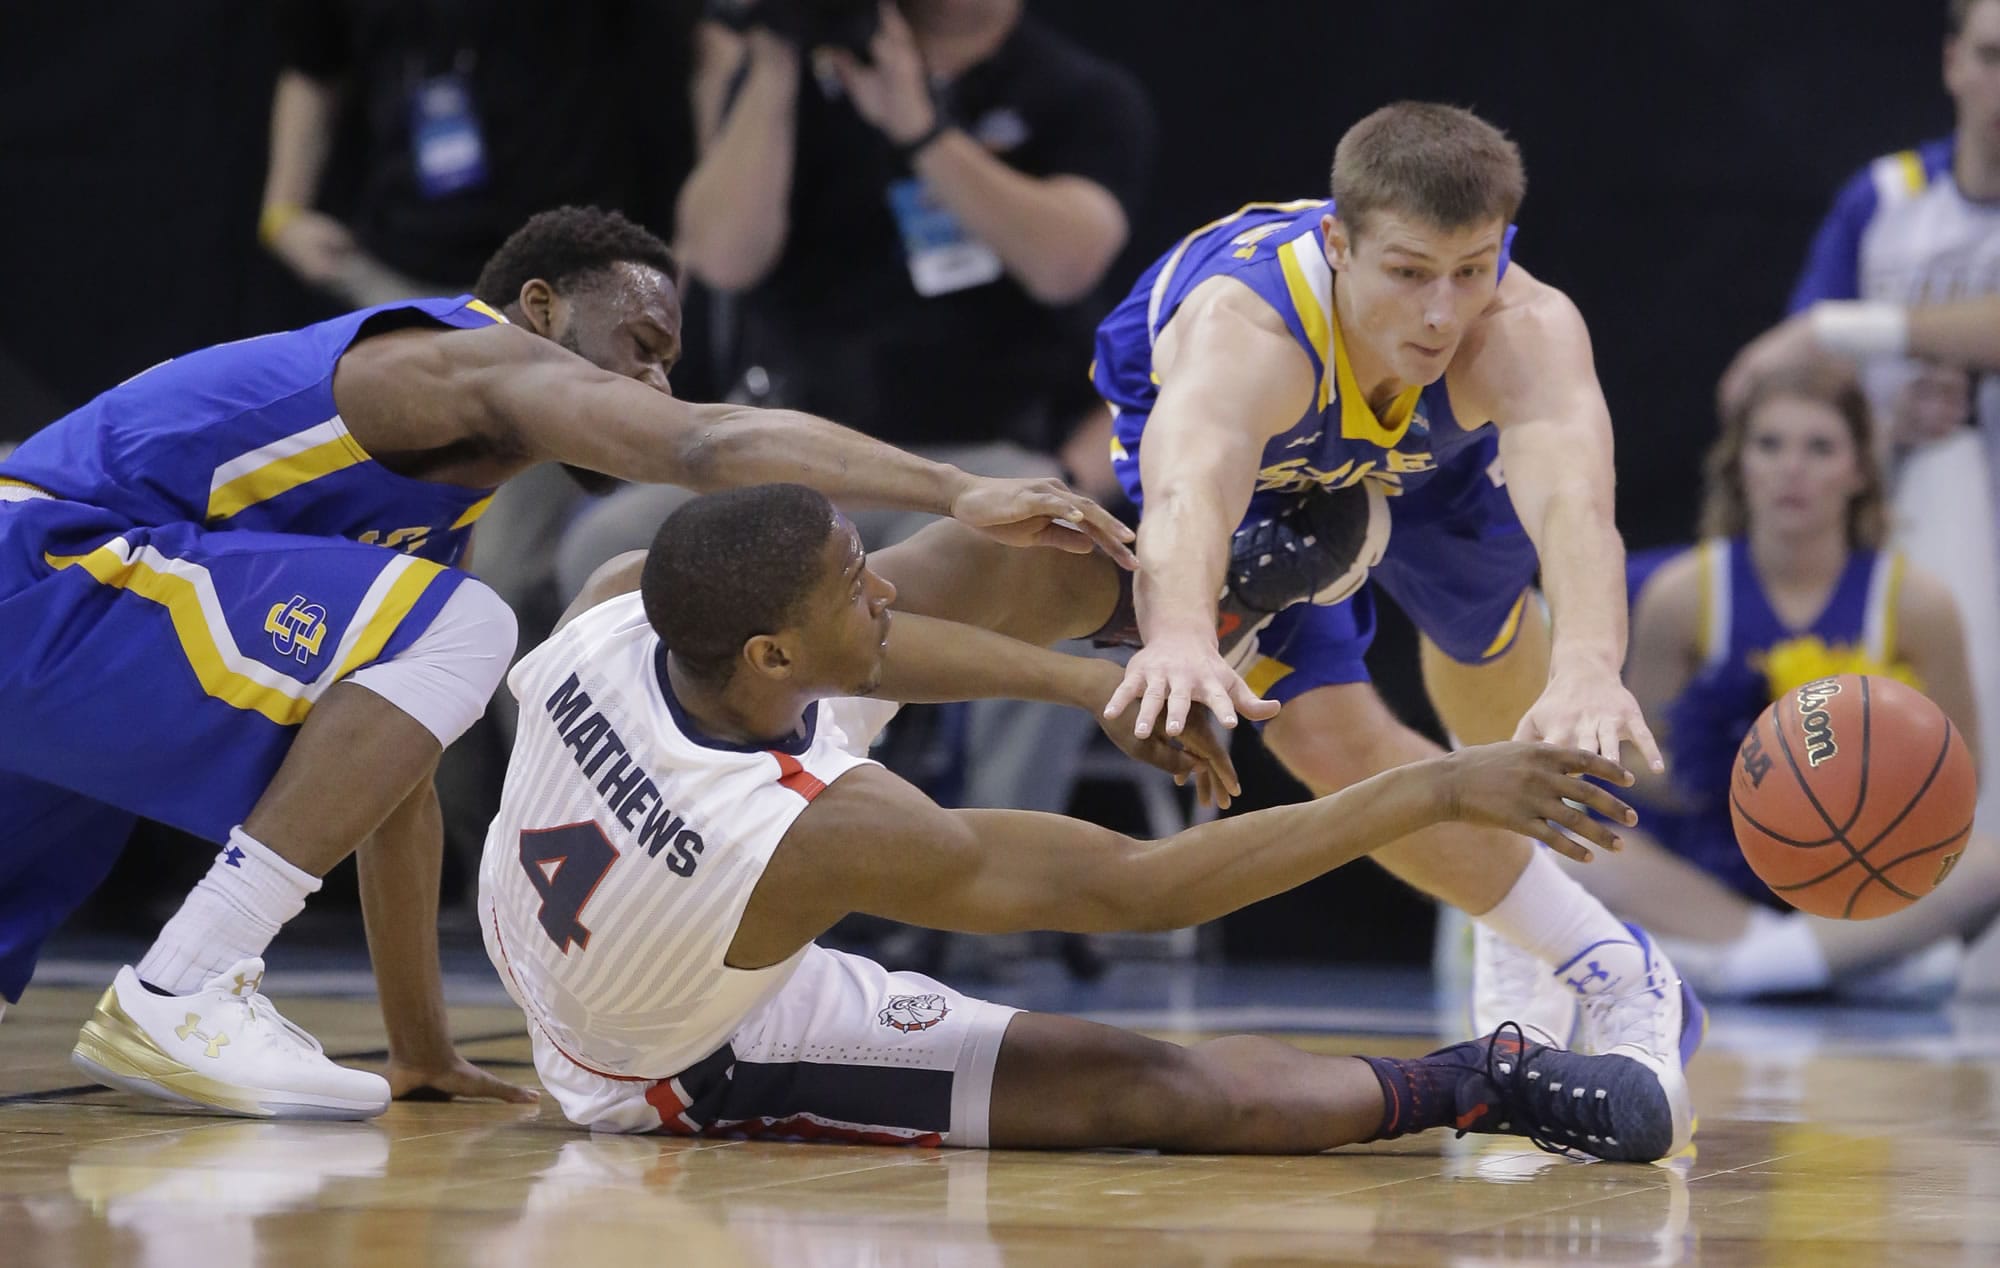 Gonzaga guard Jordan Mathews (4) passes the ball as South Dakota State's Tevin King, left, and Lane Severyn, right, defend during the first half of a first-round men's college basketball game in the NCAA Tournament, Thursday, March 16, 2017, in Salt Lake City.